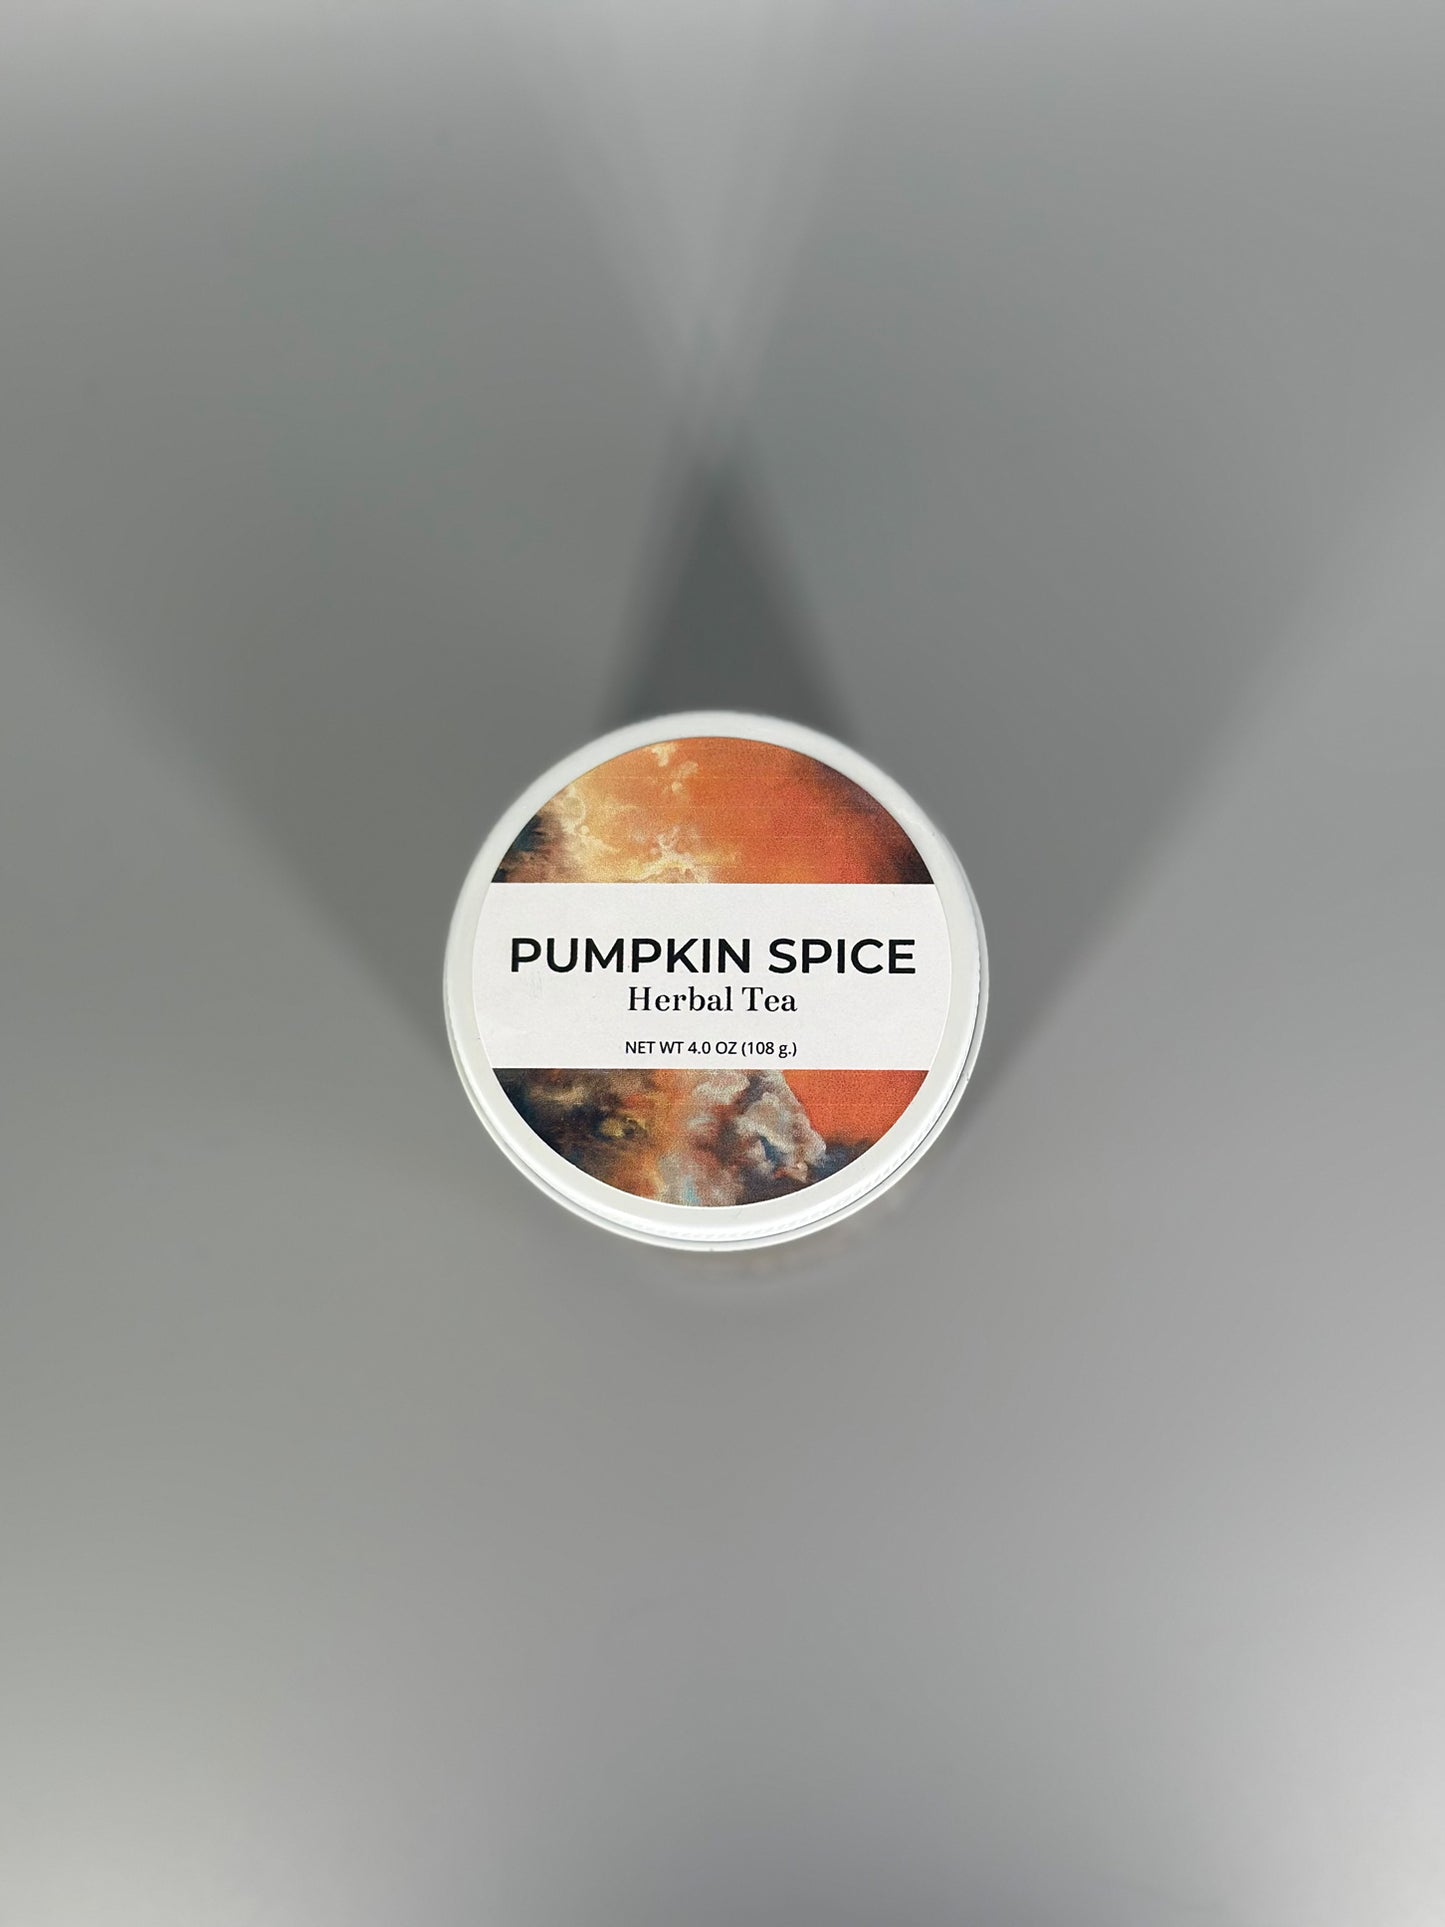 Chicory Tea Co.'s Pumpkin Spice Herbal Tea loose in the jar, view from top